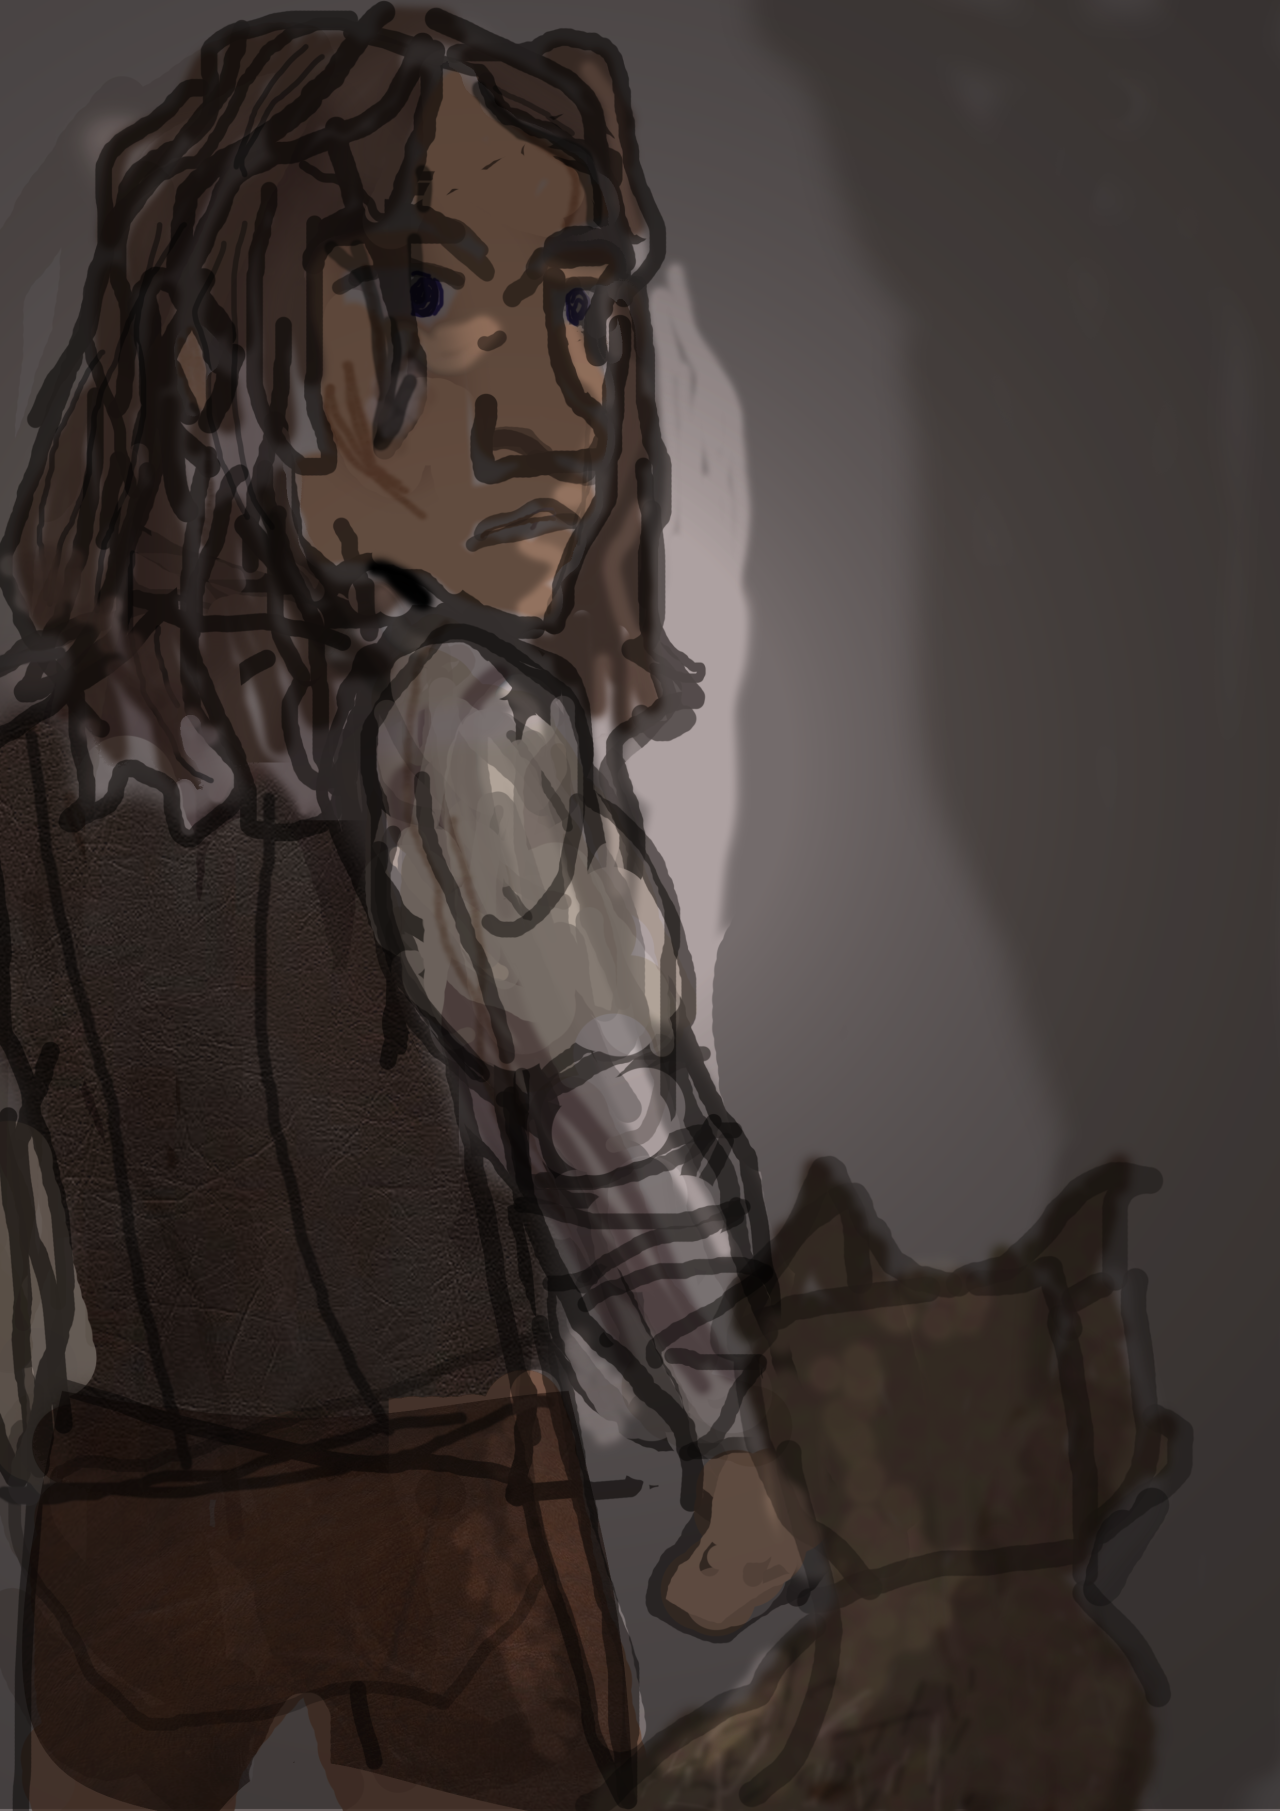 a digital drawing of Haplo from the death gate cycle and his dog, in front of a shadowed background. Both figures have their backs turned to the viewer, and Haplo is looking over his shoulder with a quiet dark expression. He has long brown hair with white tips, and is wearing a leather vest on a short sleeved shirt, with his arm covered by bandages up to the wrist. the dim light ahead reflects on his face.